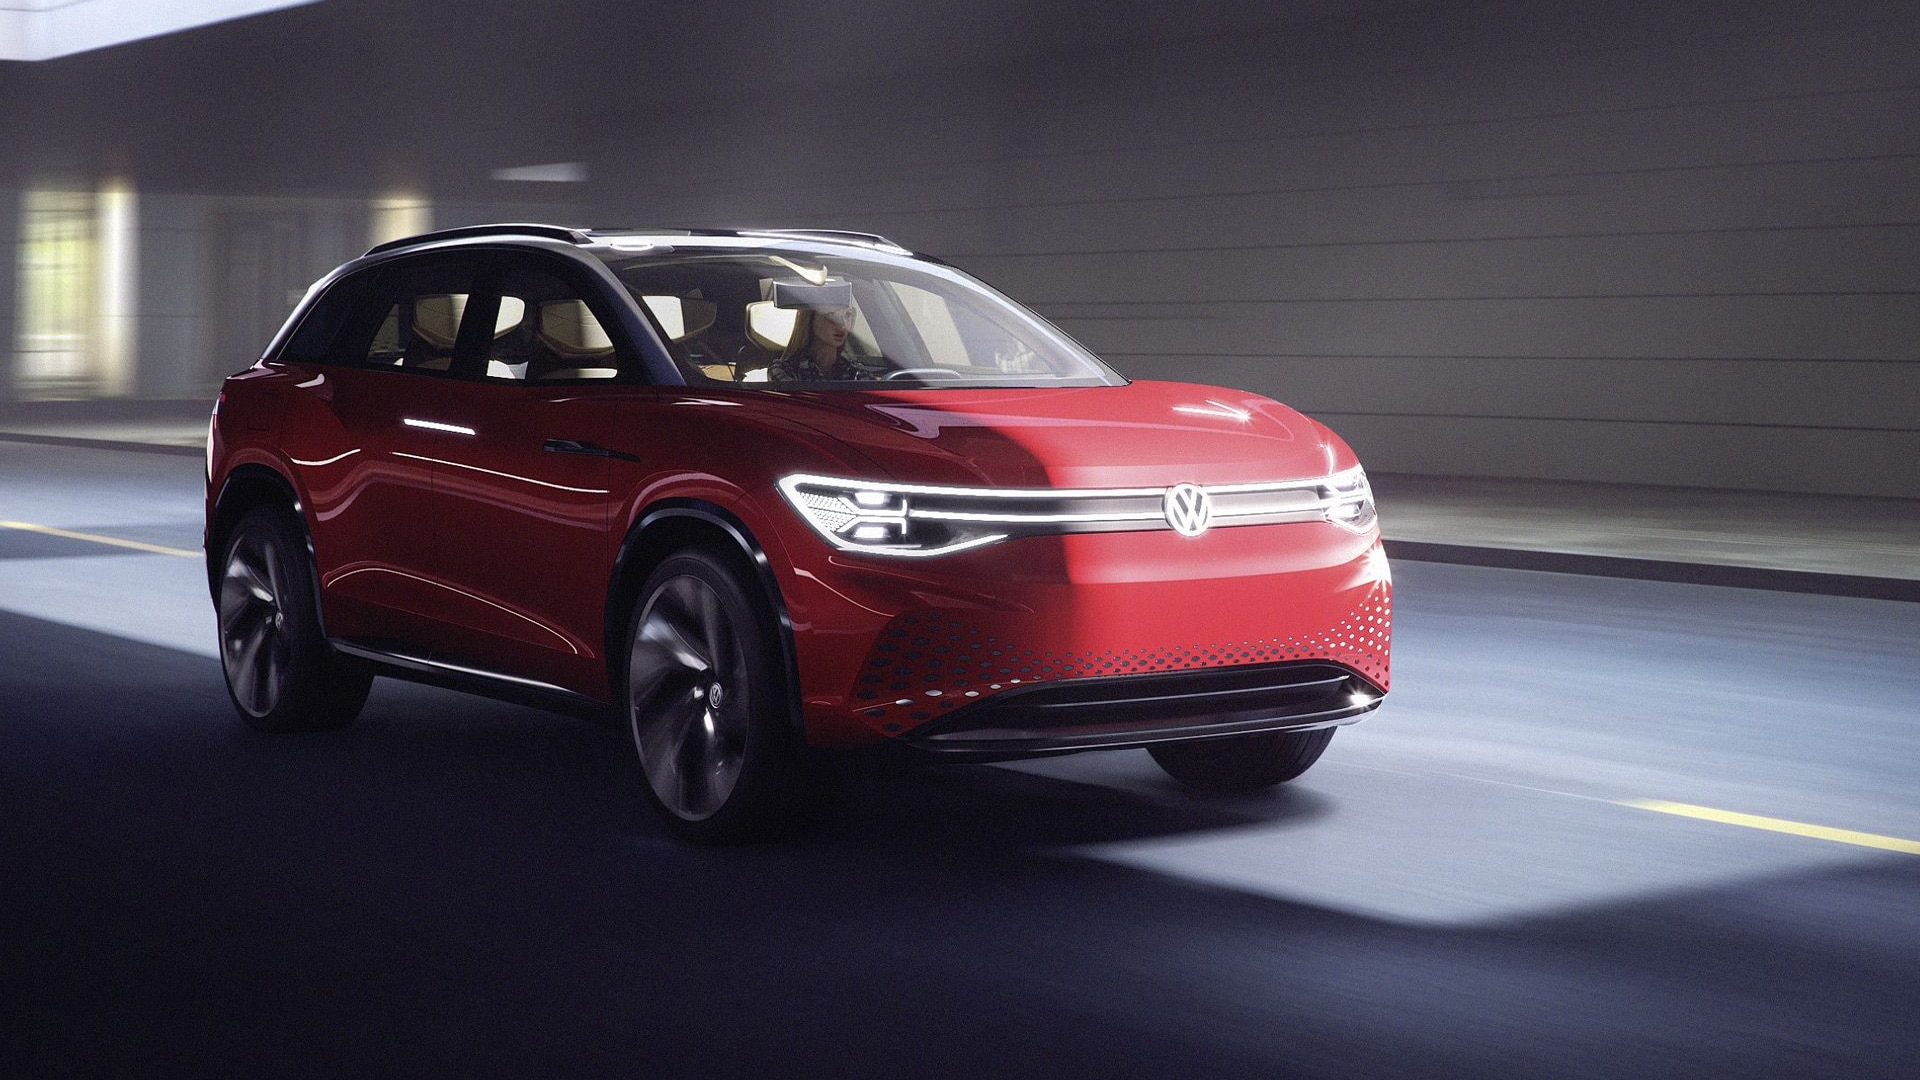 Id Roomzz Concept Previews Large Electric Suv From Vw